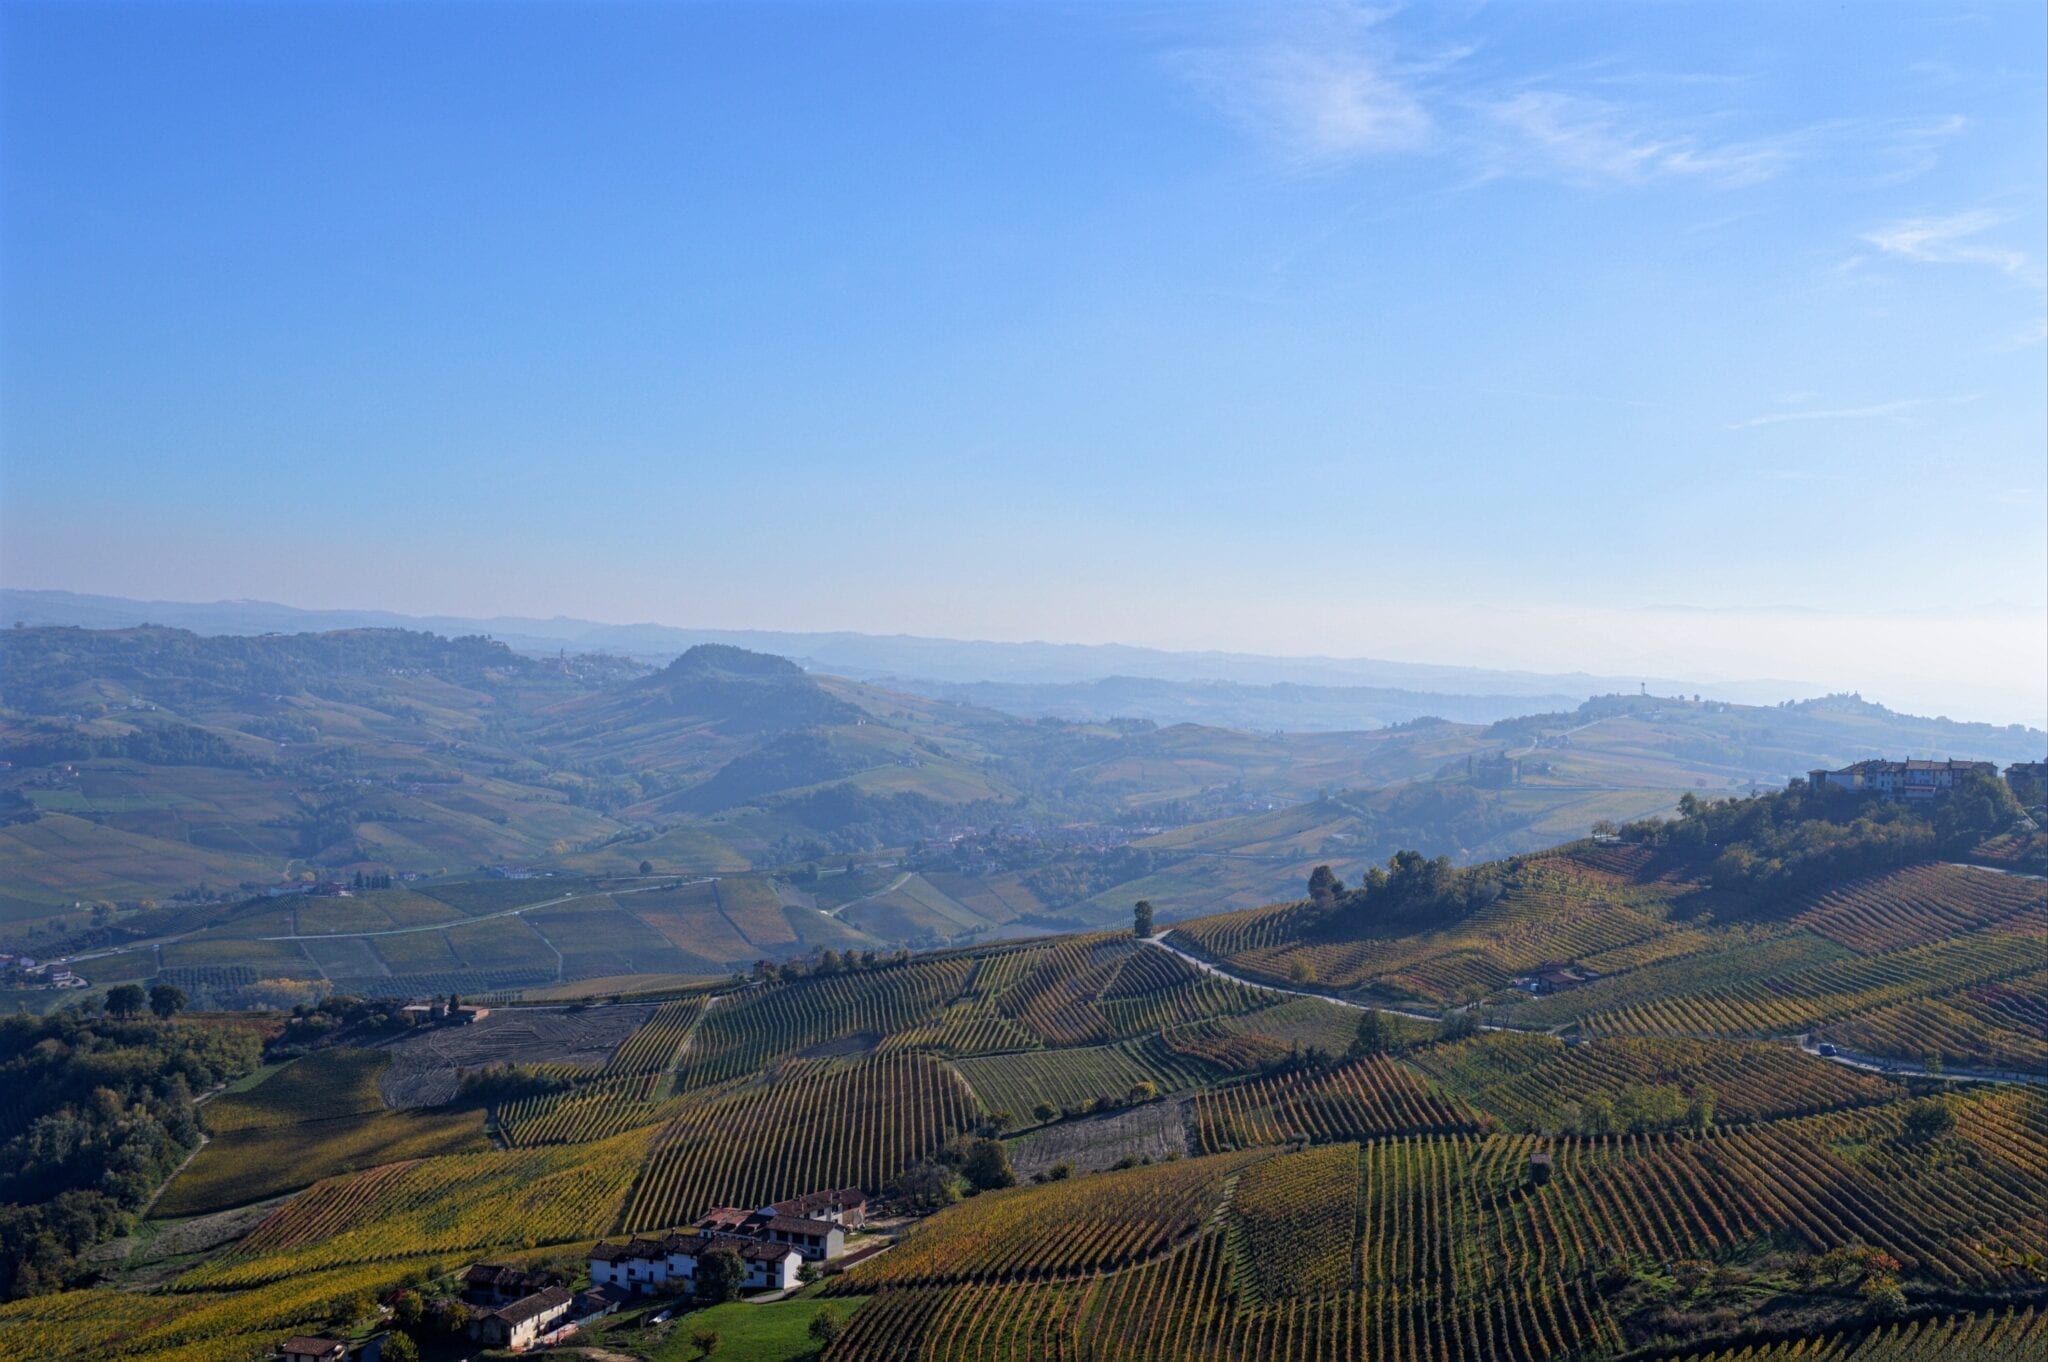 La Morra Viewpoint - Looking over Barolo wine country - Piedmont, Italy